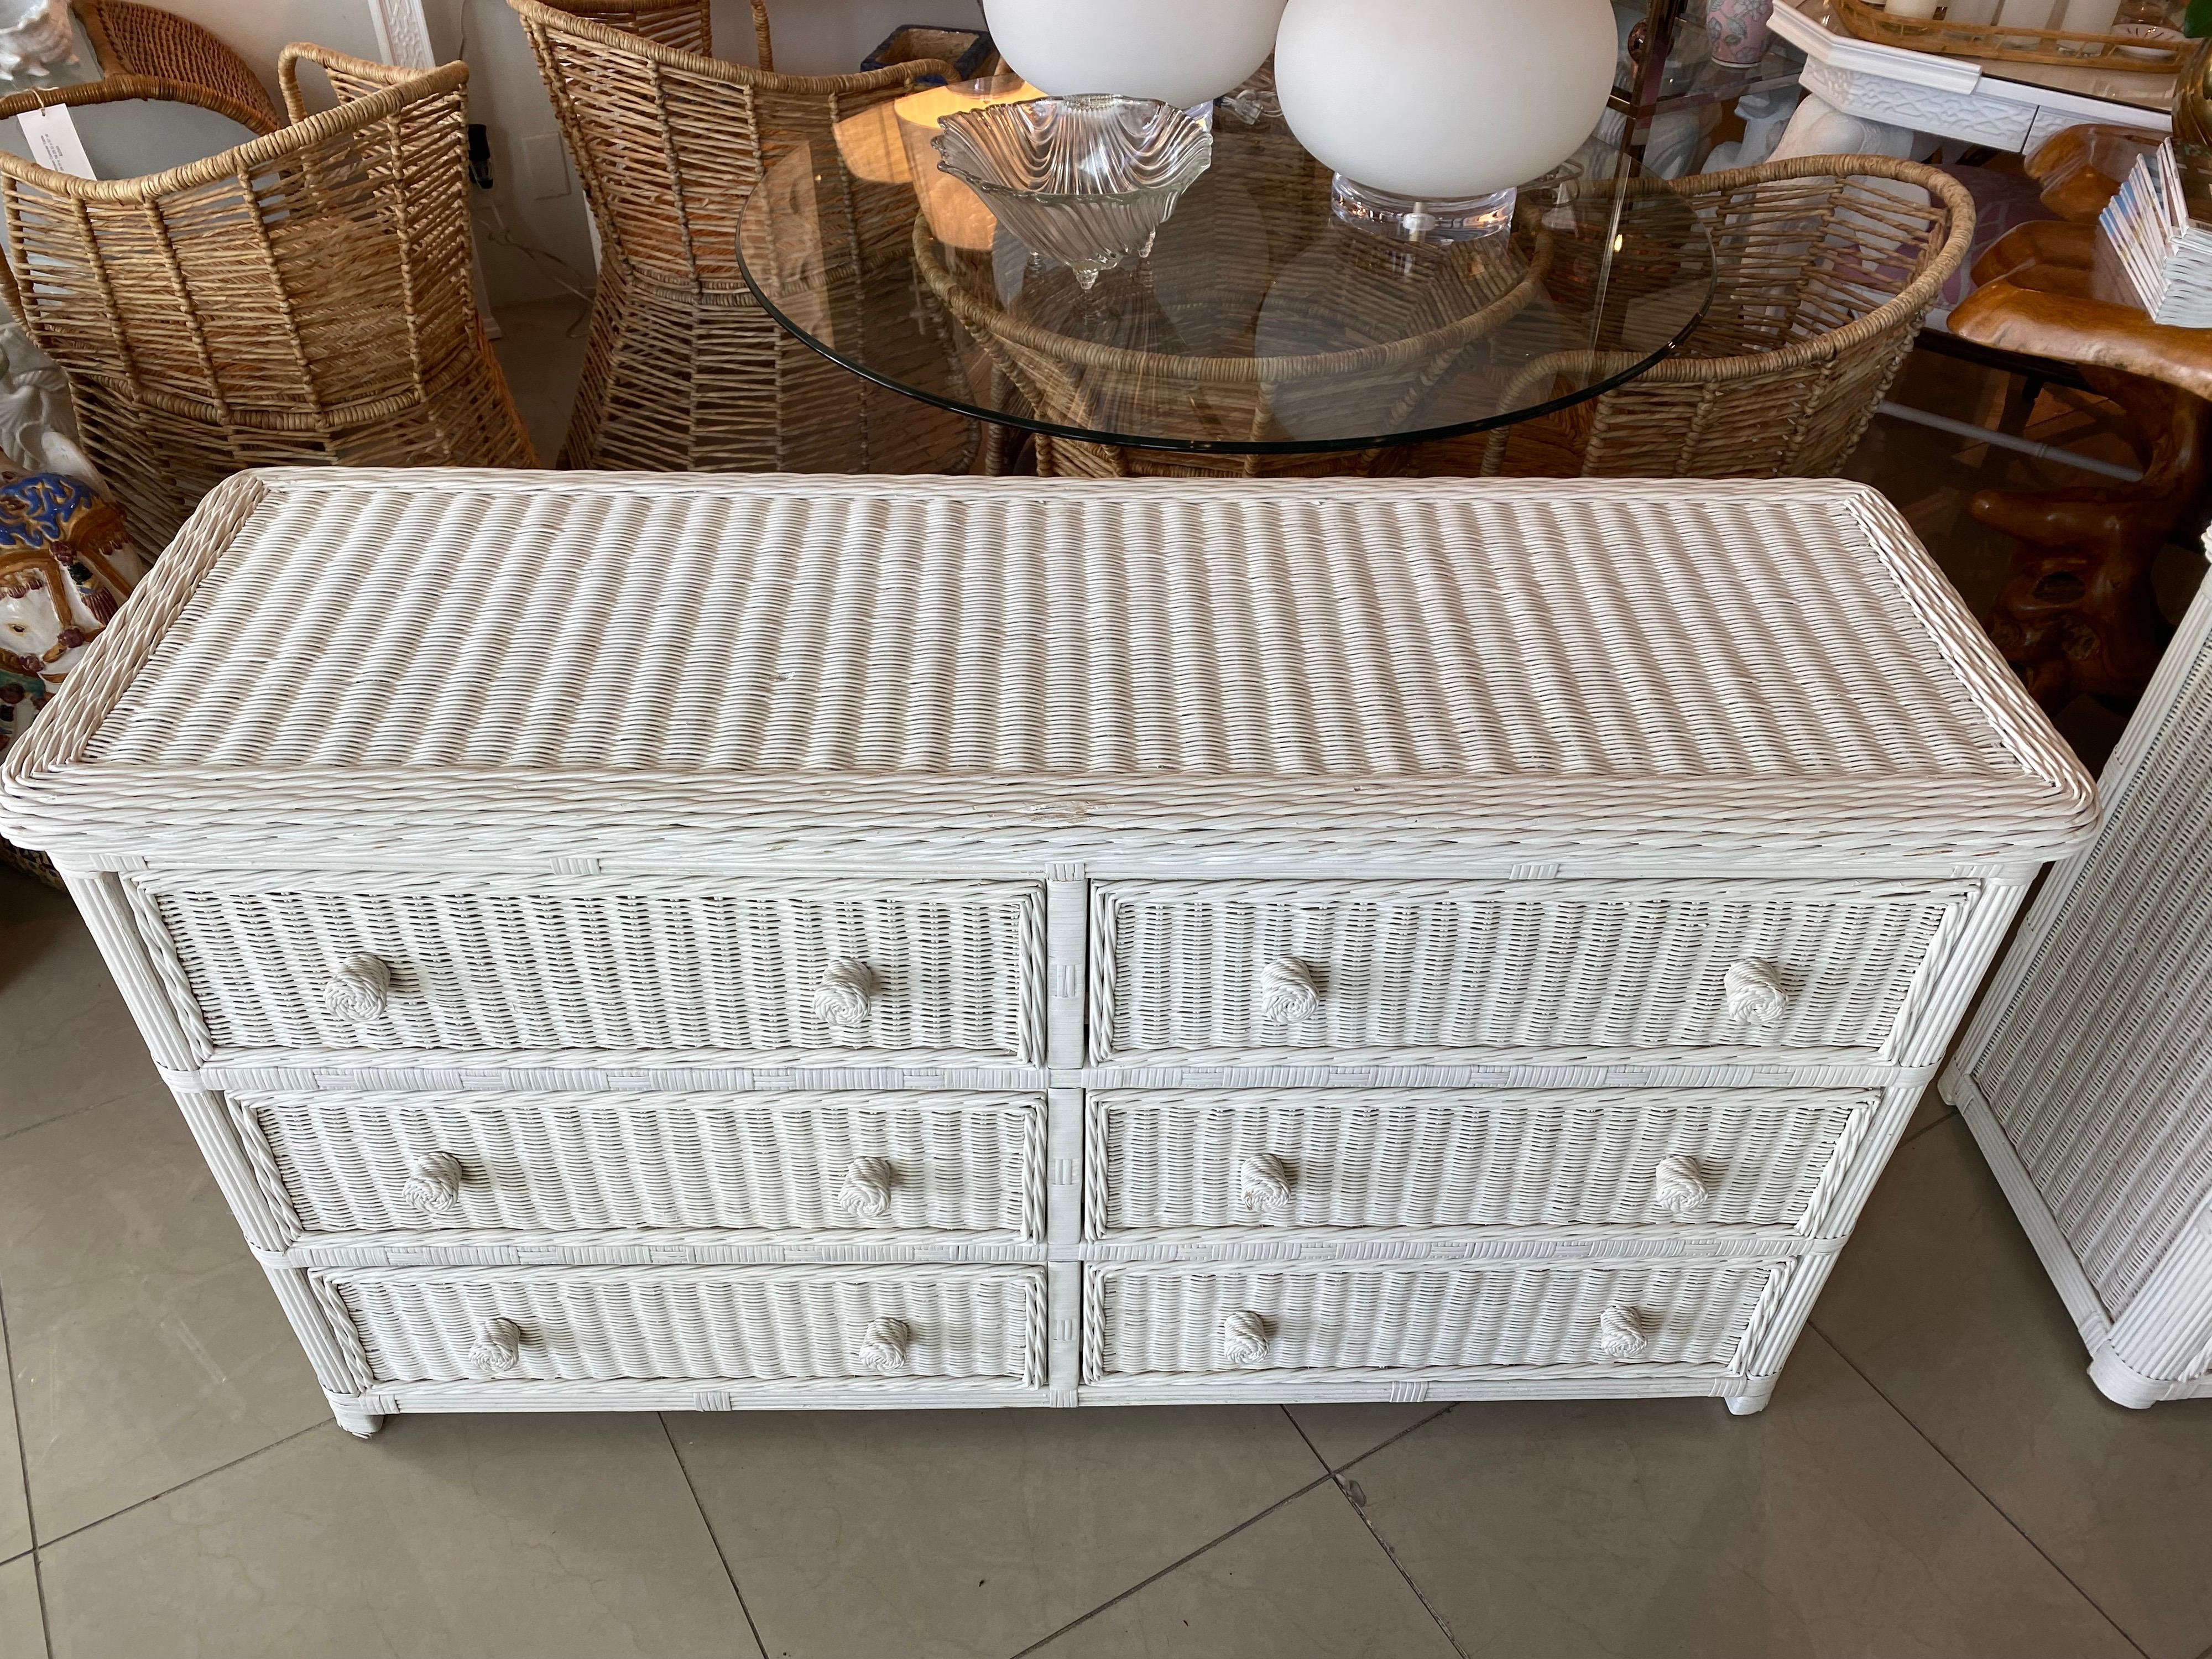 Vintage white wicker dresser with 6 drawers. Wicker is also on both sides and top. White finish is original and may have slight wear. Glass top is also included for the top of dresser. I have another of these listed if a pair is needed.